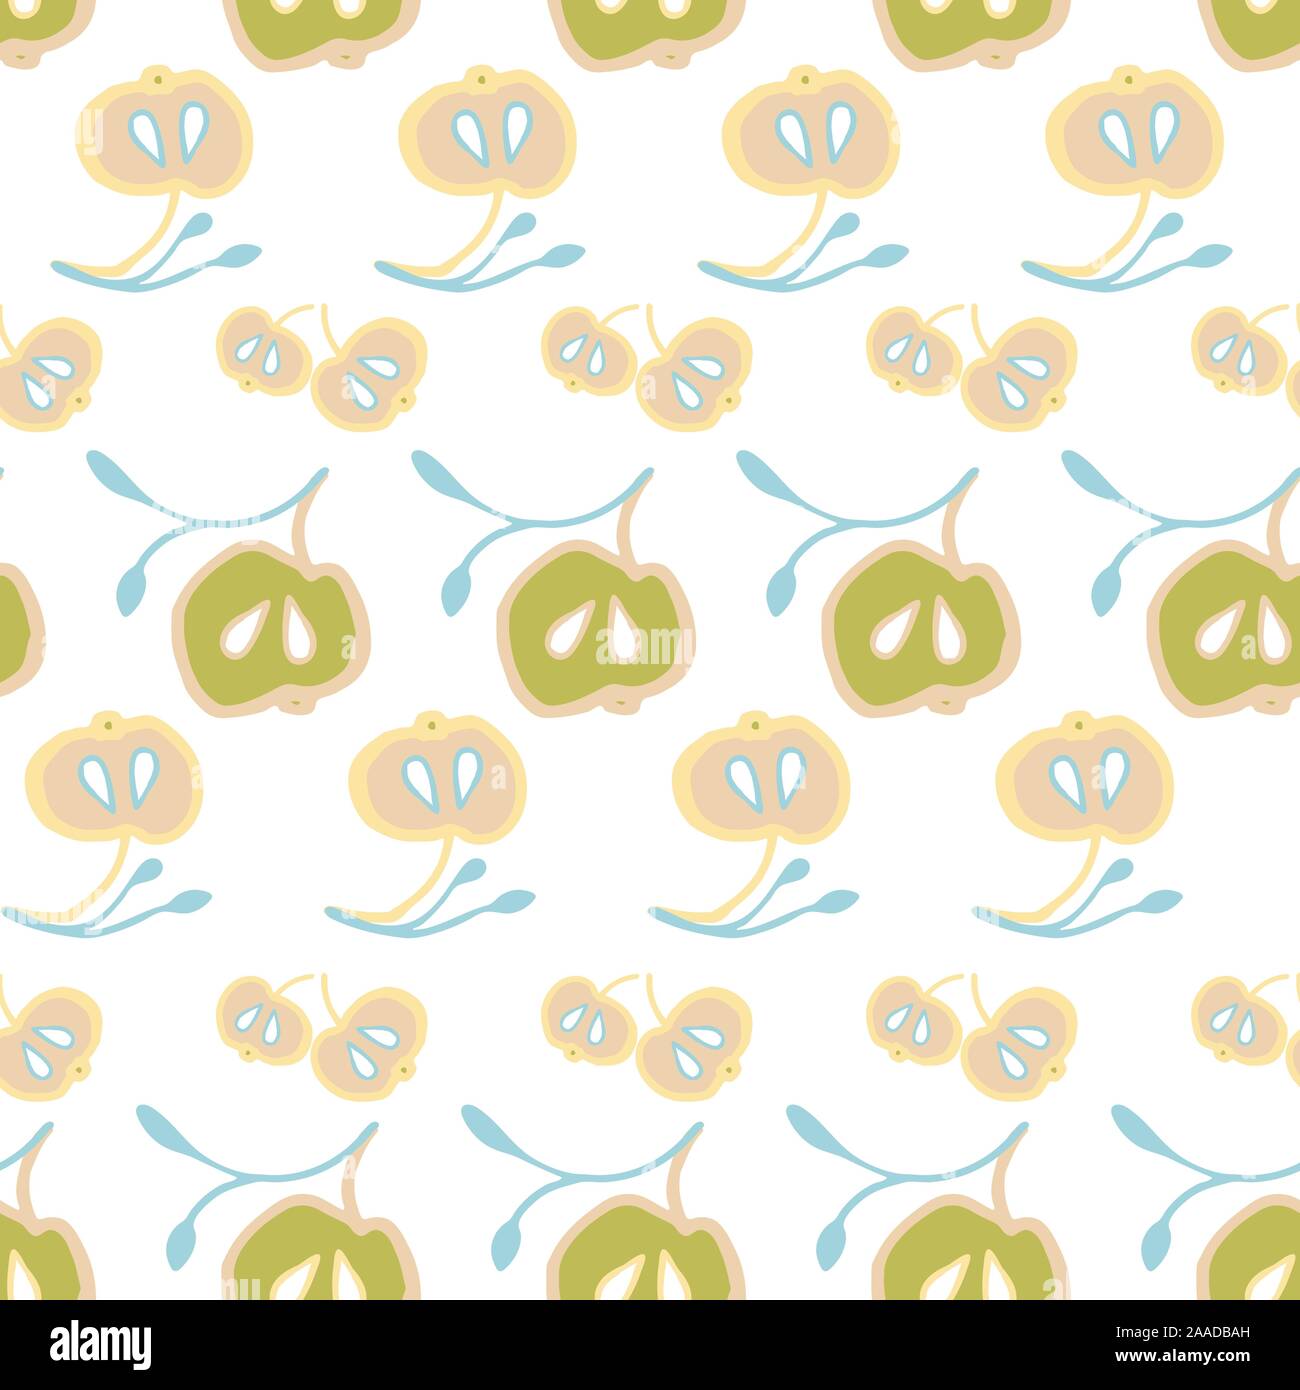 Retro floral fall geometric apple pattern. Seamless vector background. White doodle apple shape with dot on white background. For fabric, wallpaper, packaging, print. Vintage kitchen background. Stock Vector